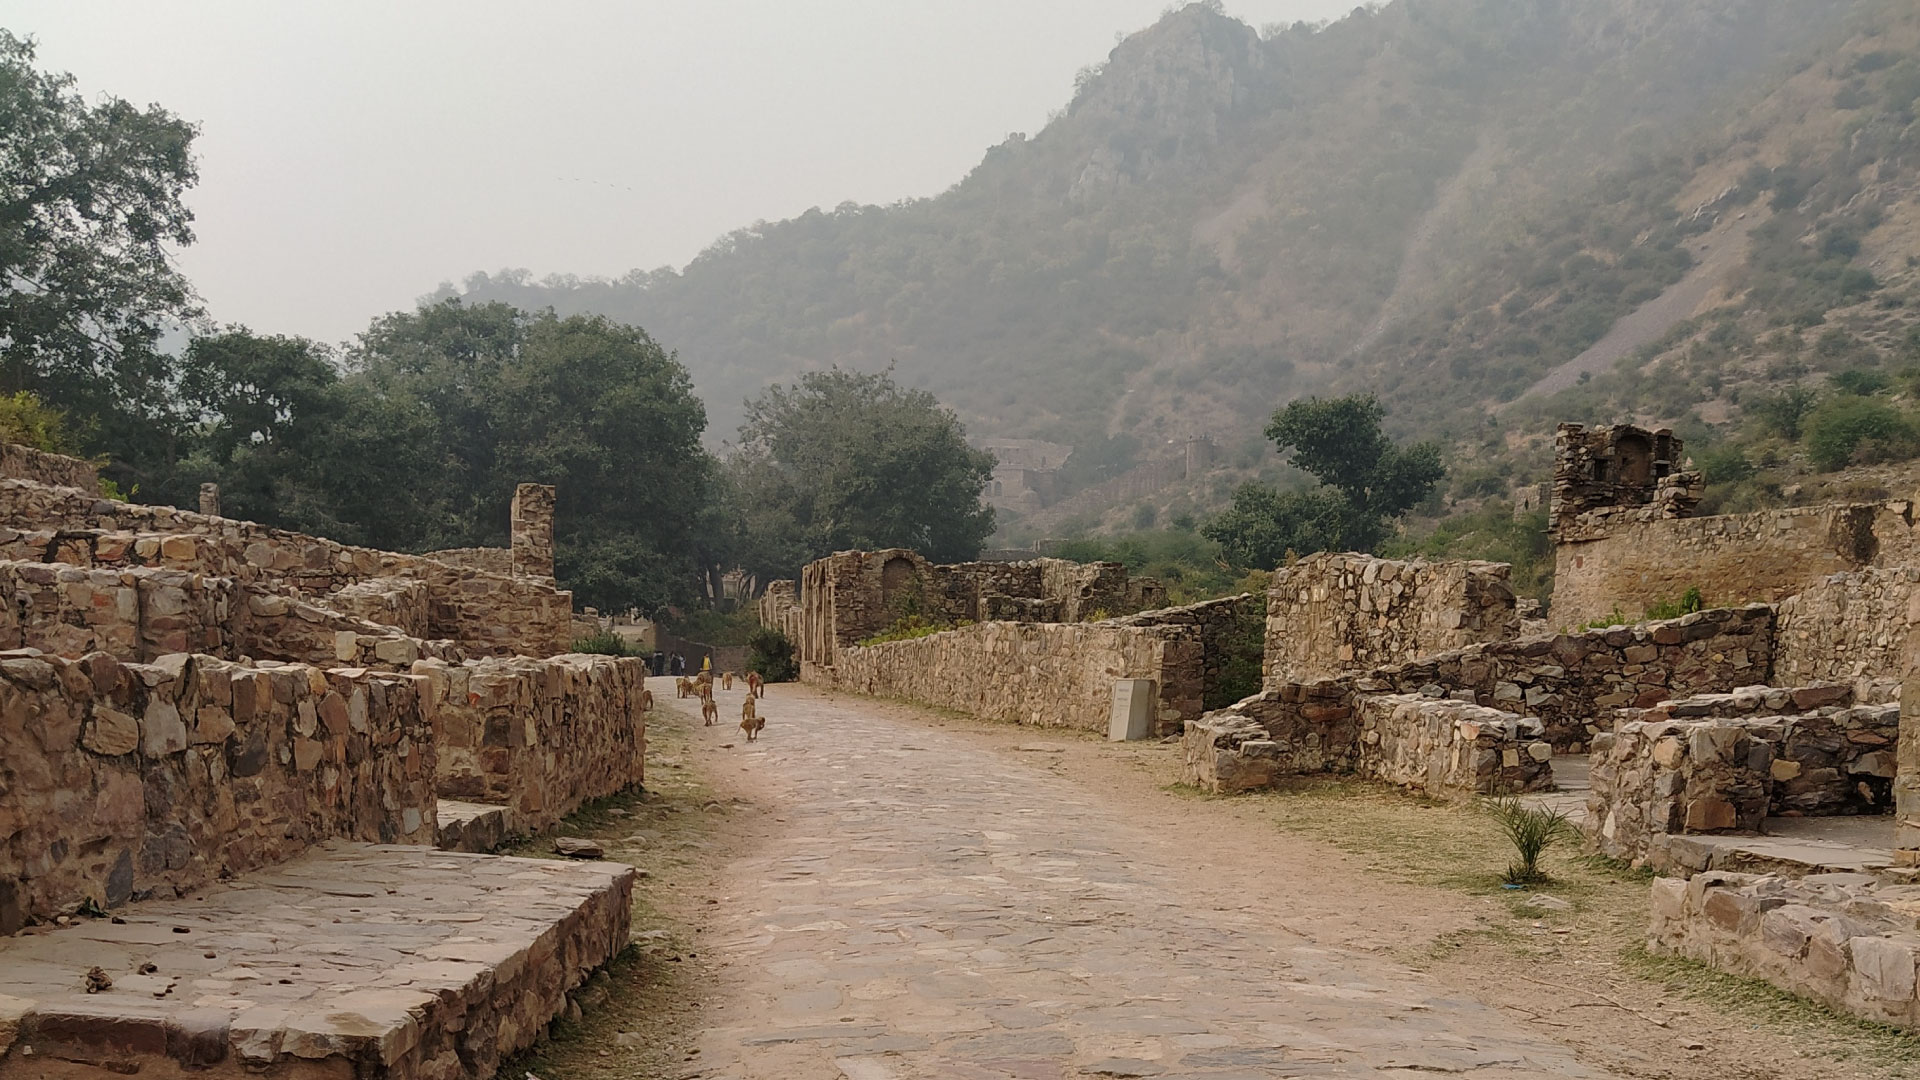 on our way to bhangarh